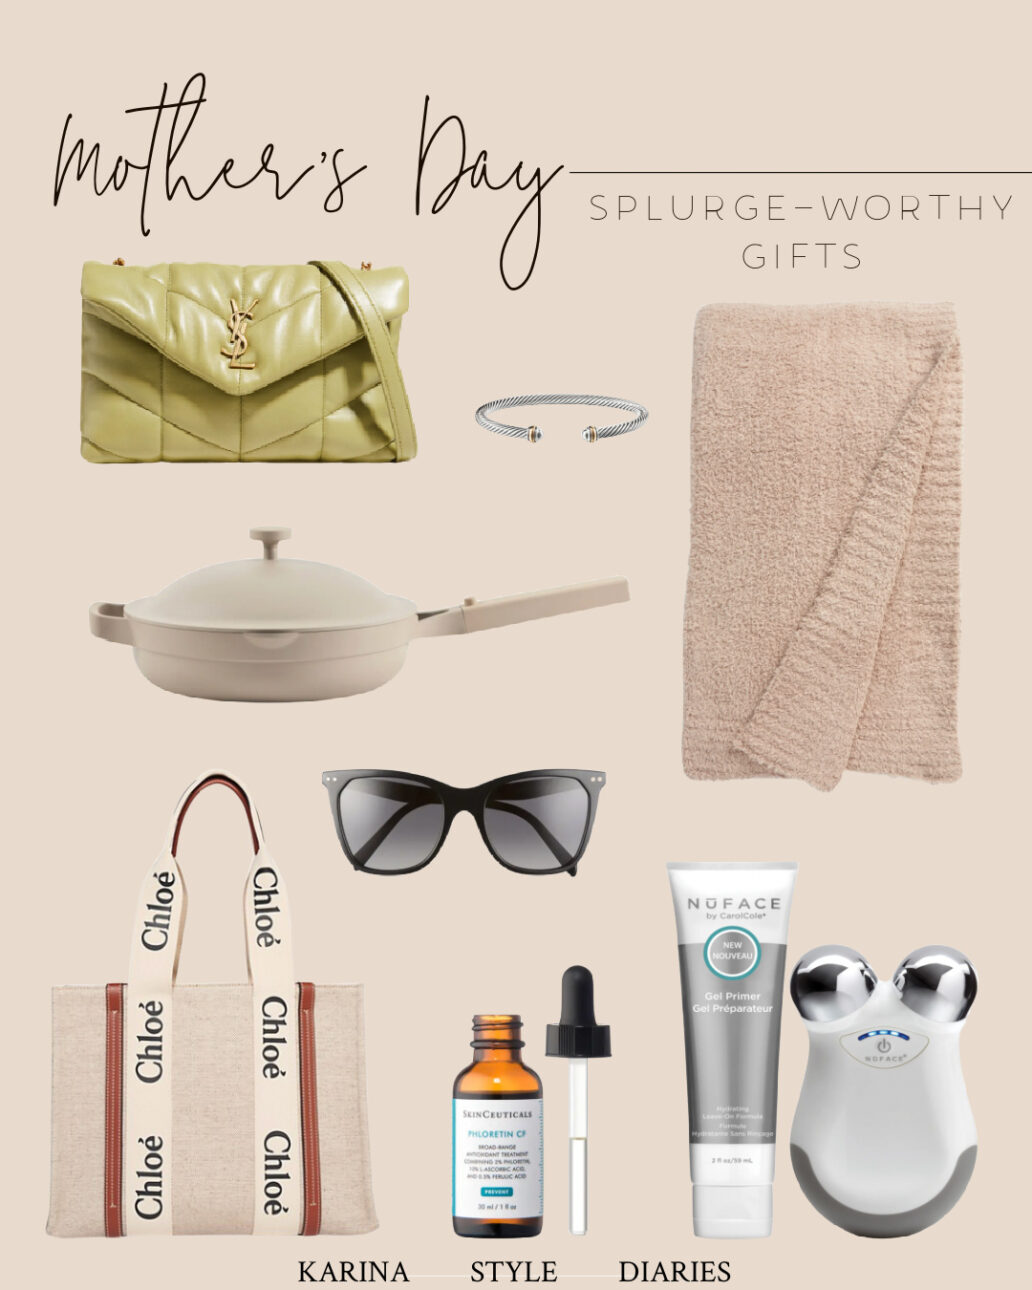 30 Mother's Day Gift Ideas (from a first-time mom!)